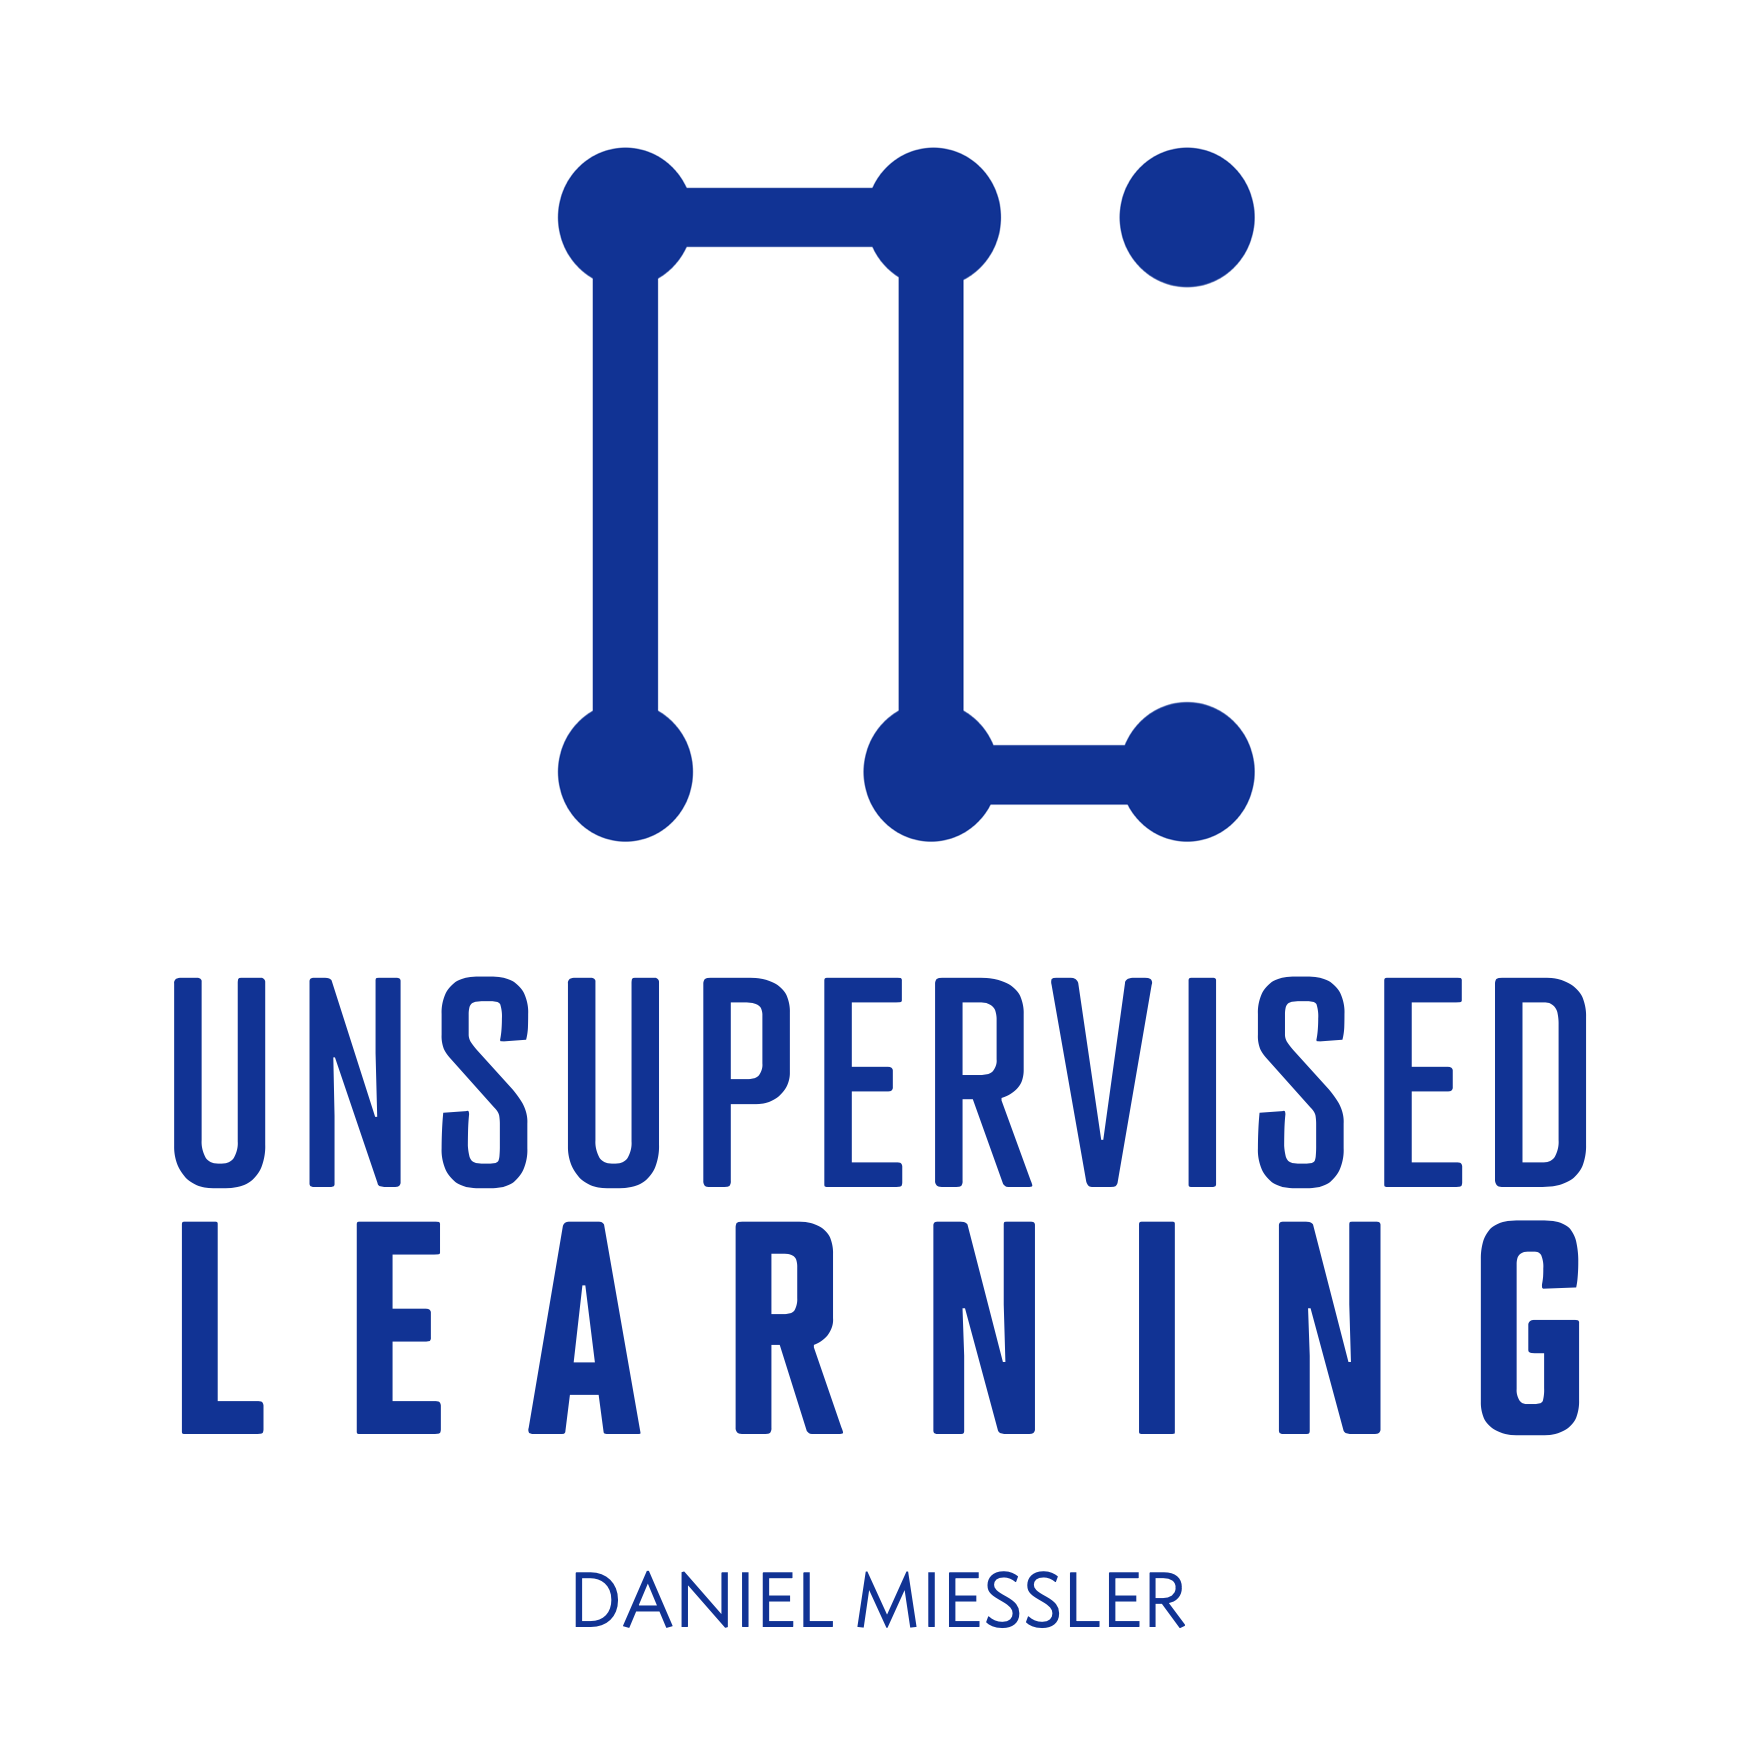 Unsupervised Learning: No. 208